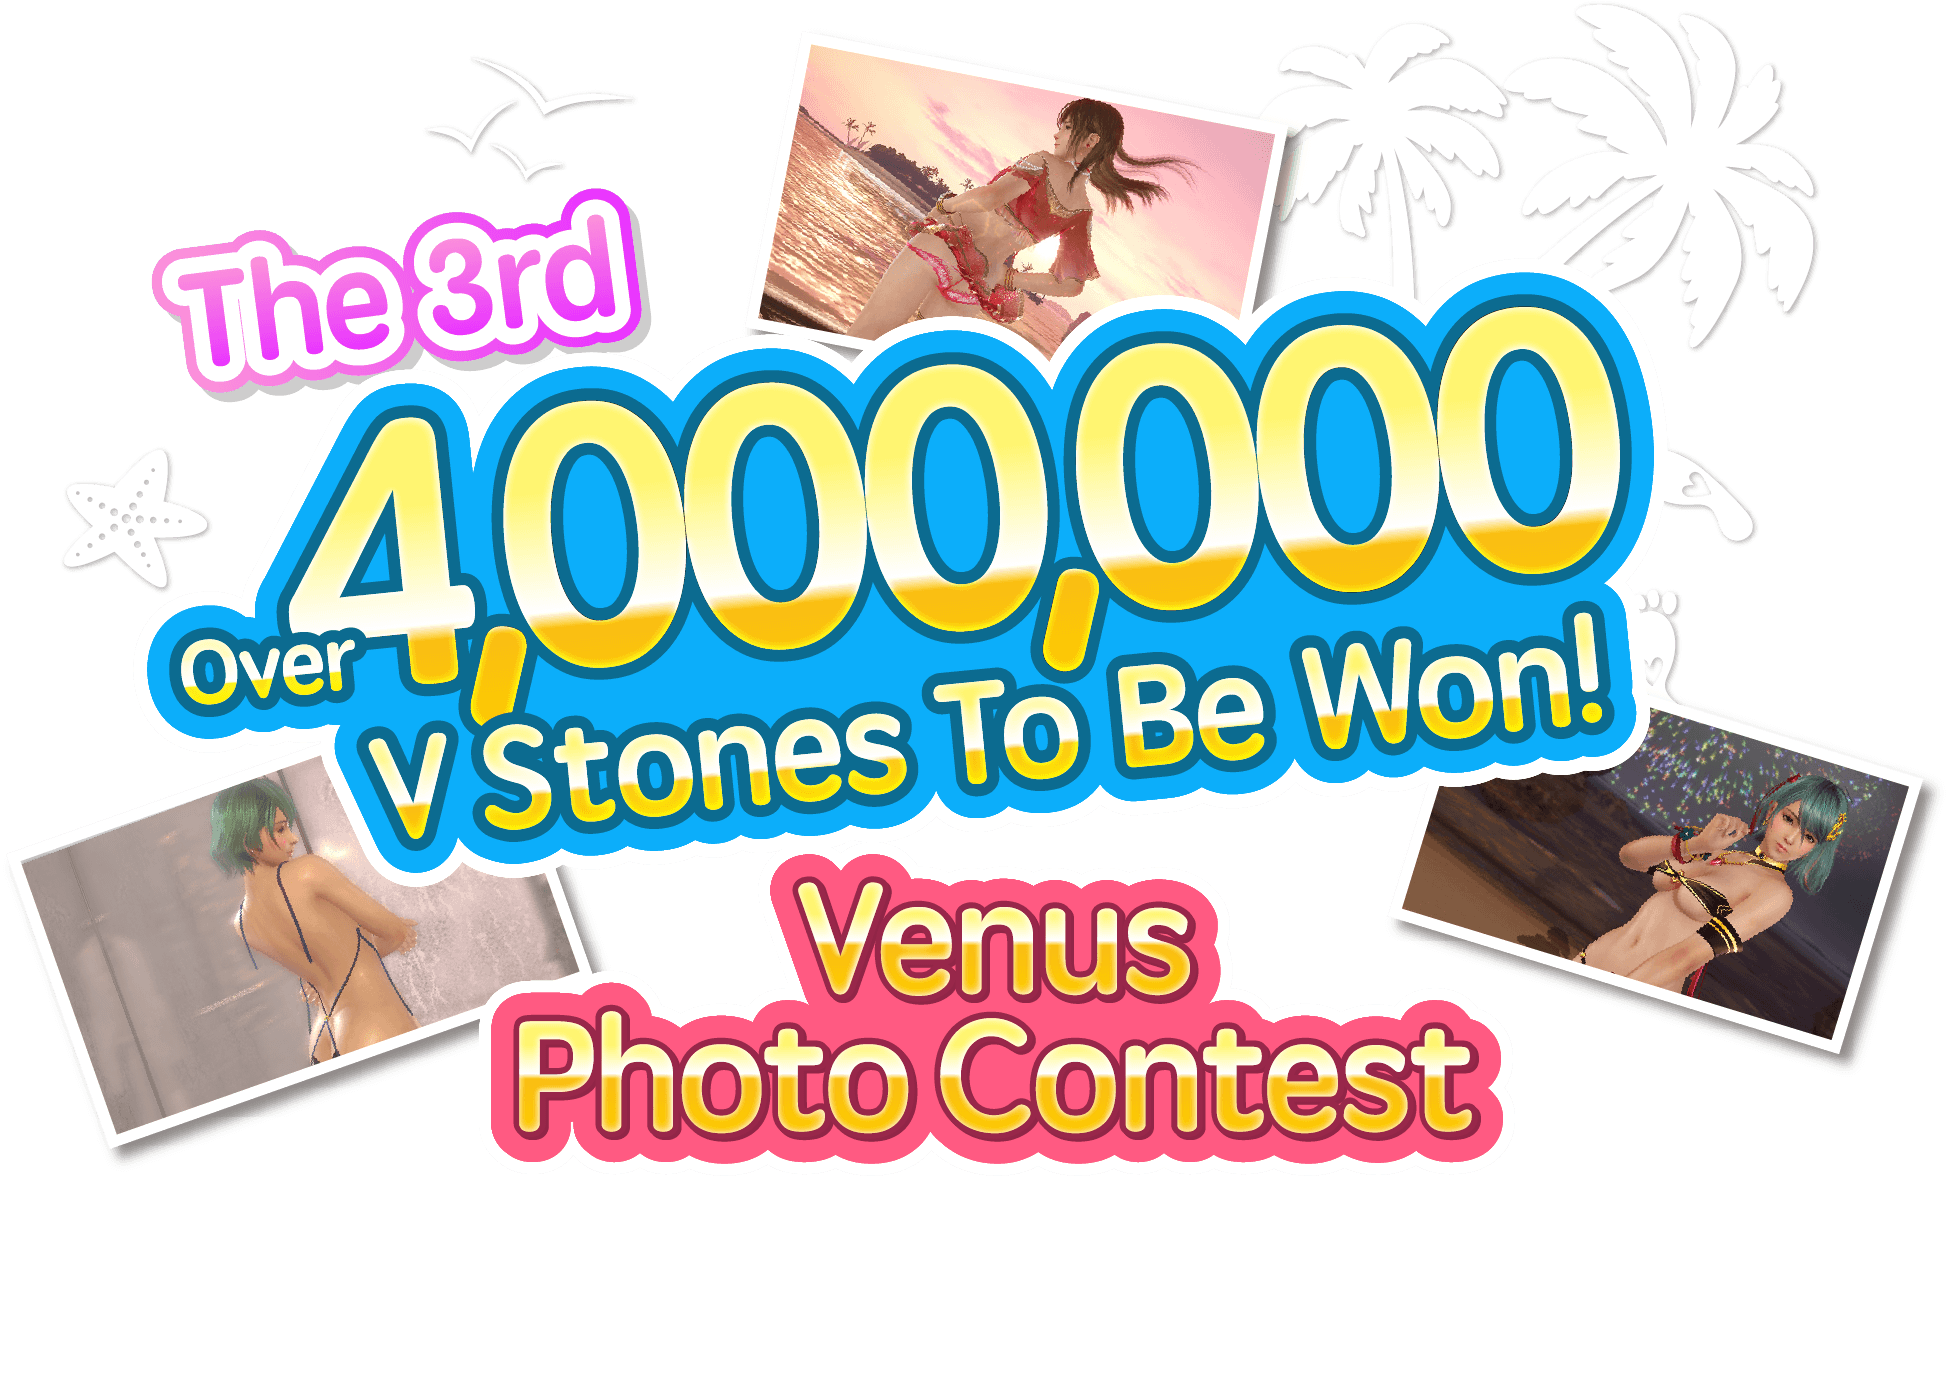 Over 4,000,000 V Stones To Be Won! The 3rd Venus Photo Contest